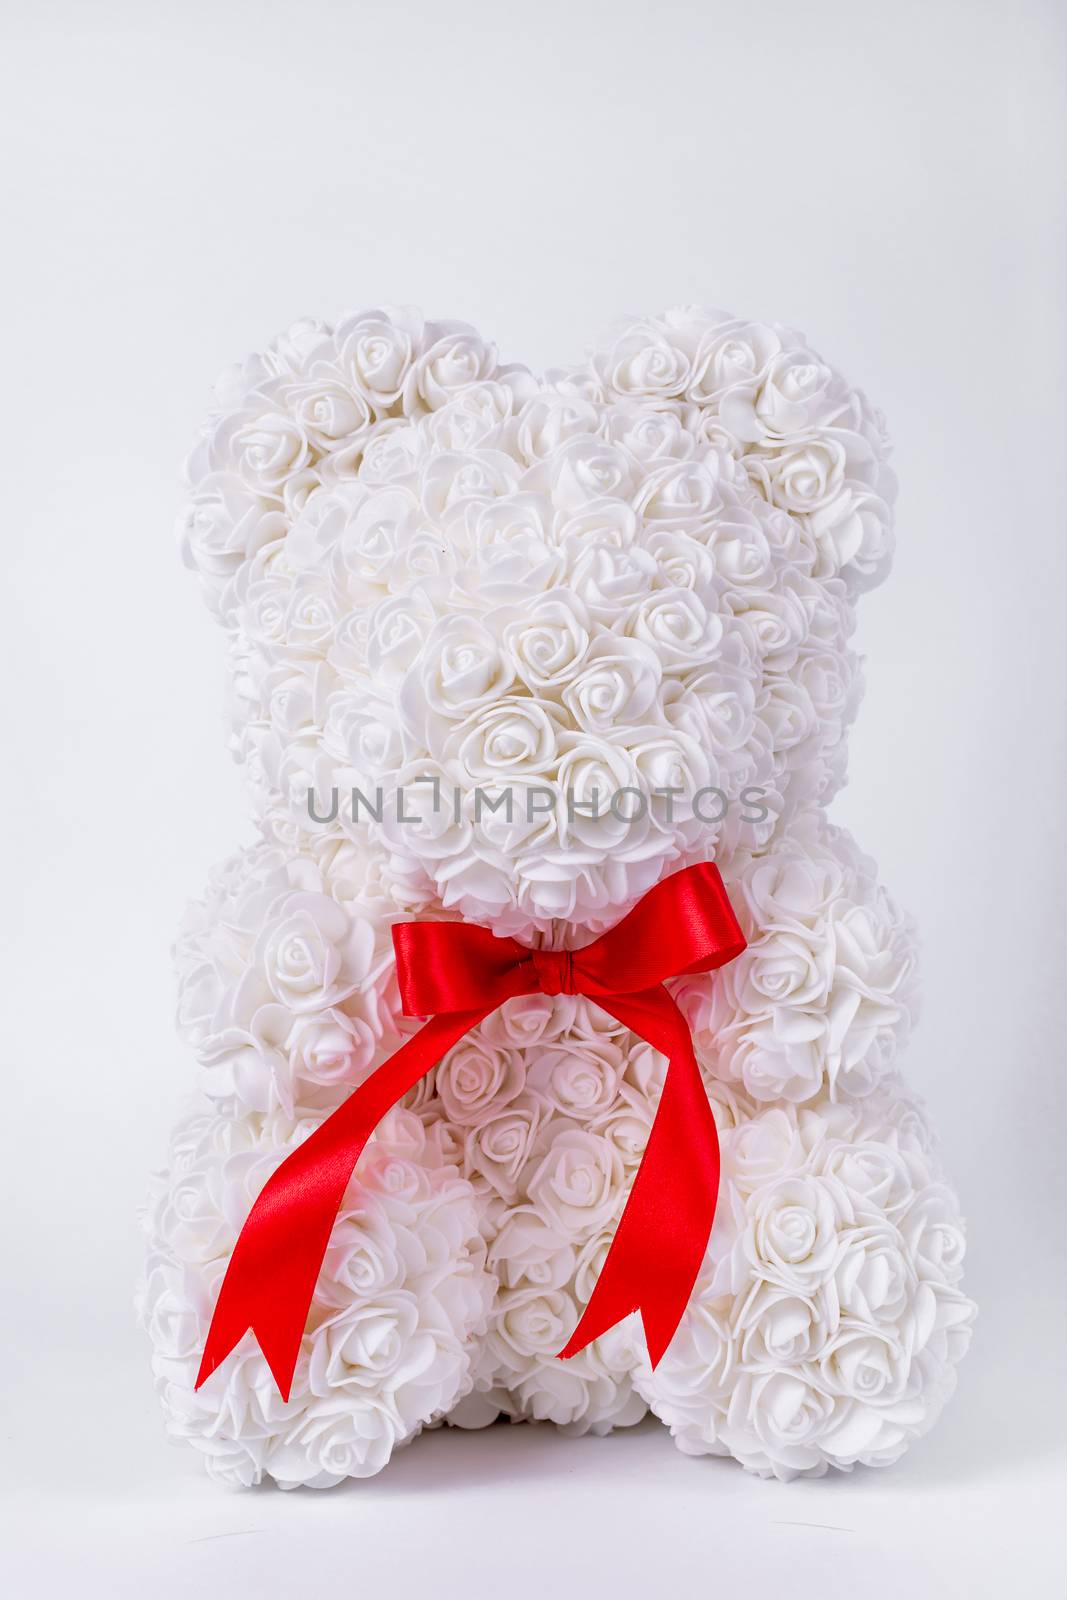 White teddy bear toy of foamirane roses. Red stripe on teddy neck. Stock photo isolated on white background. Gift on holiday for women.